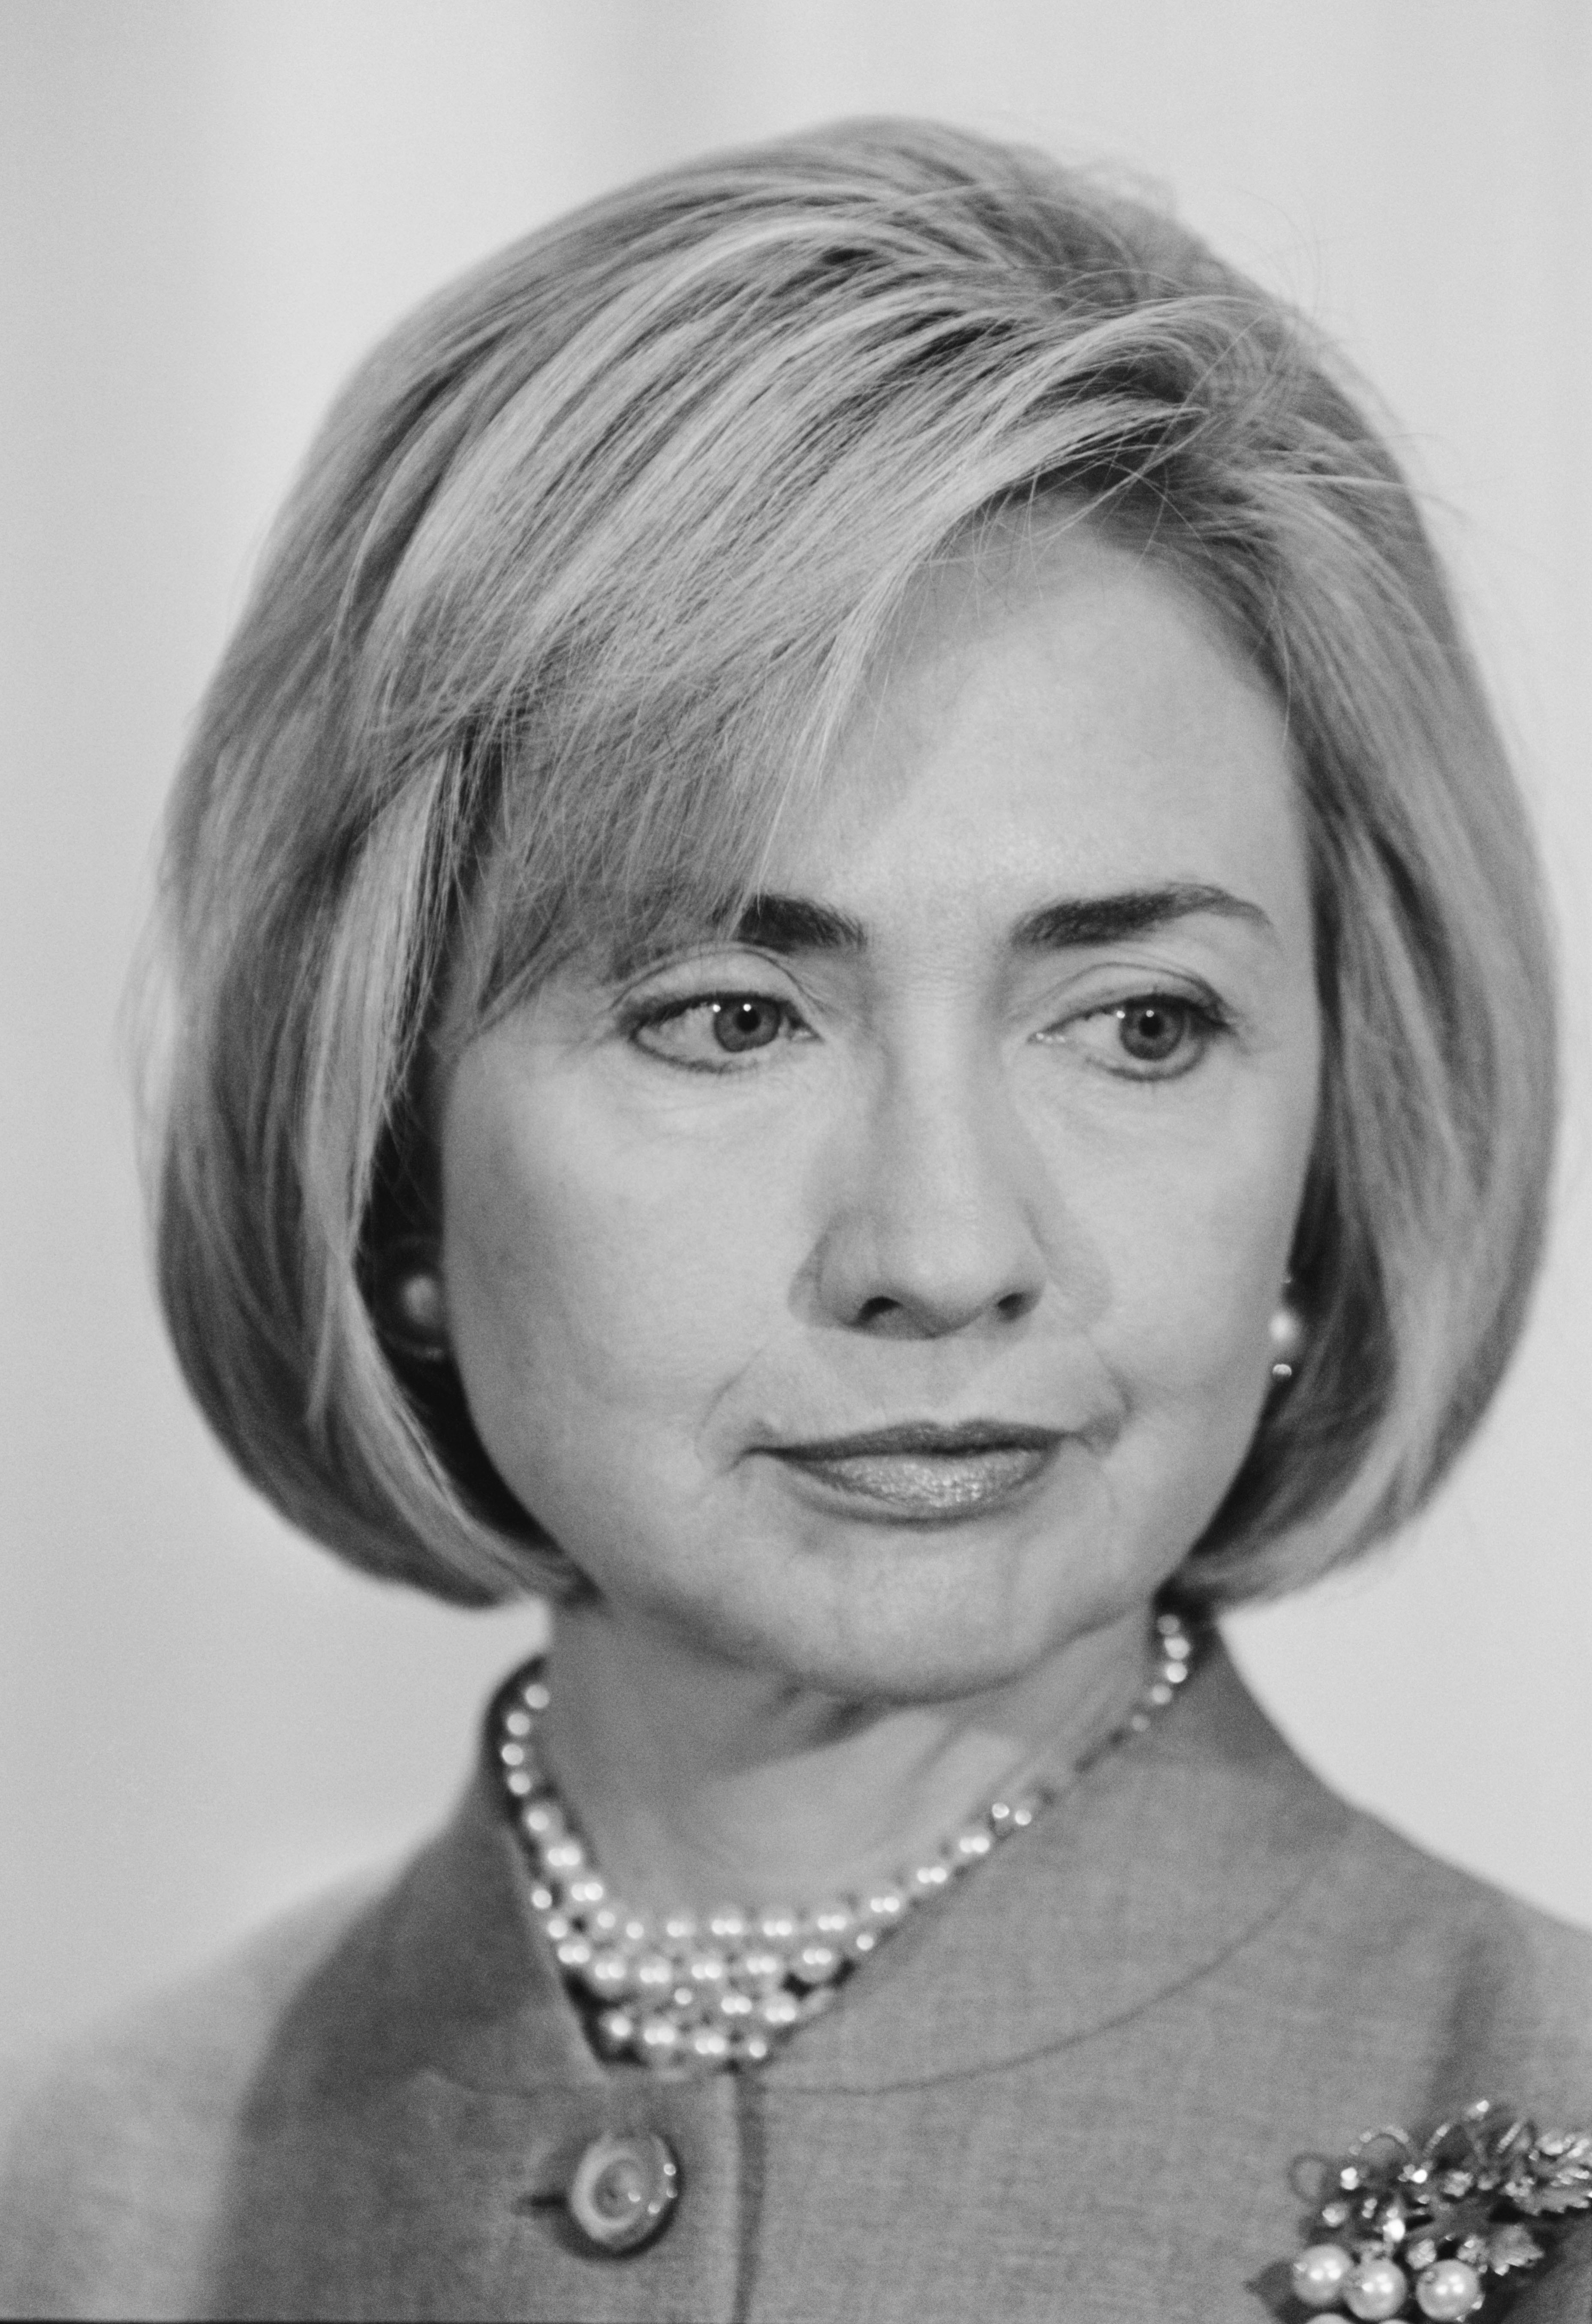 Hillary Clint Photo Gallery By David Hume Kennerly